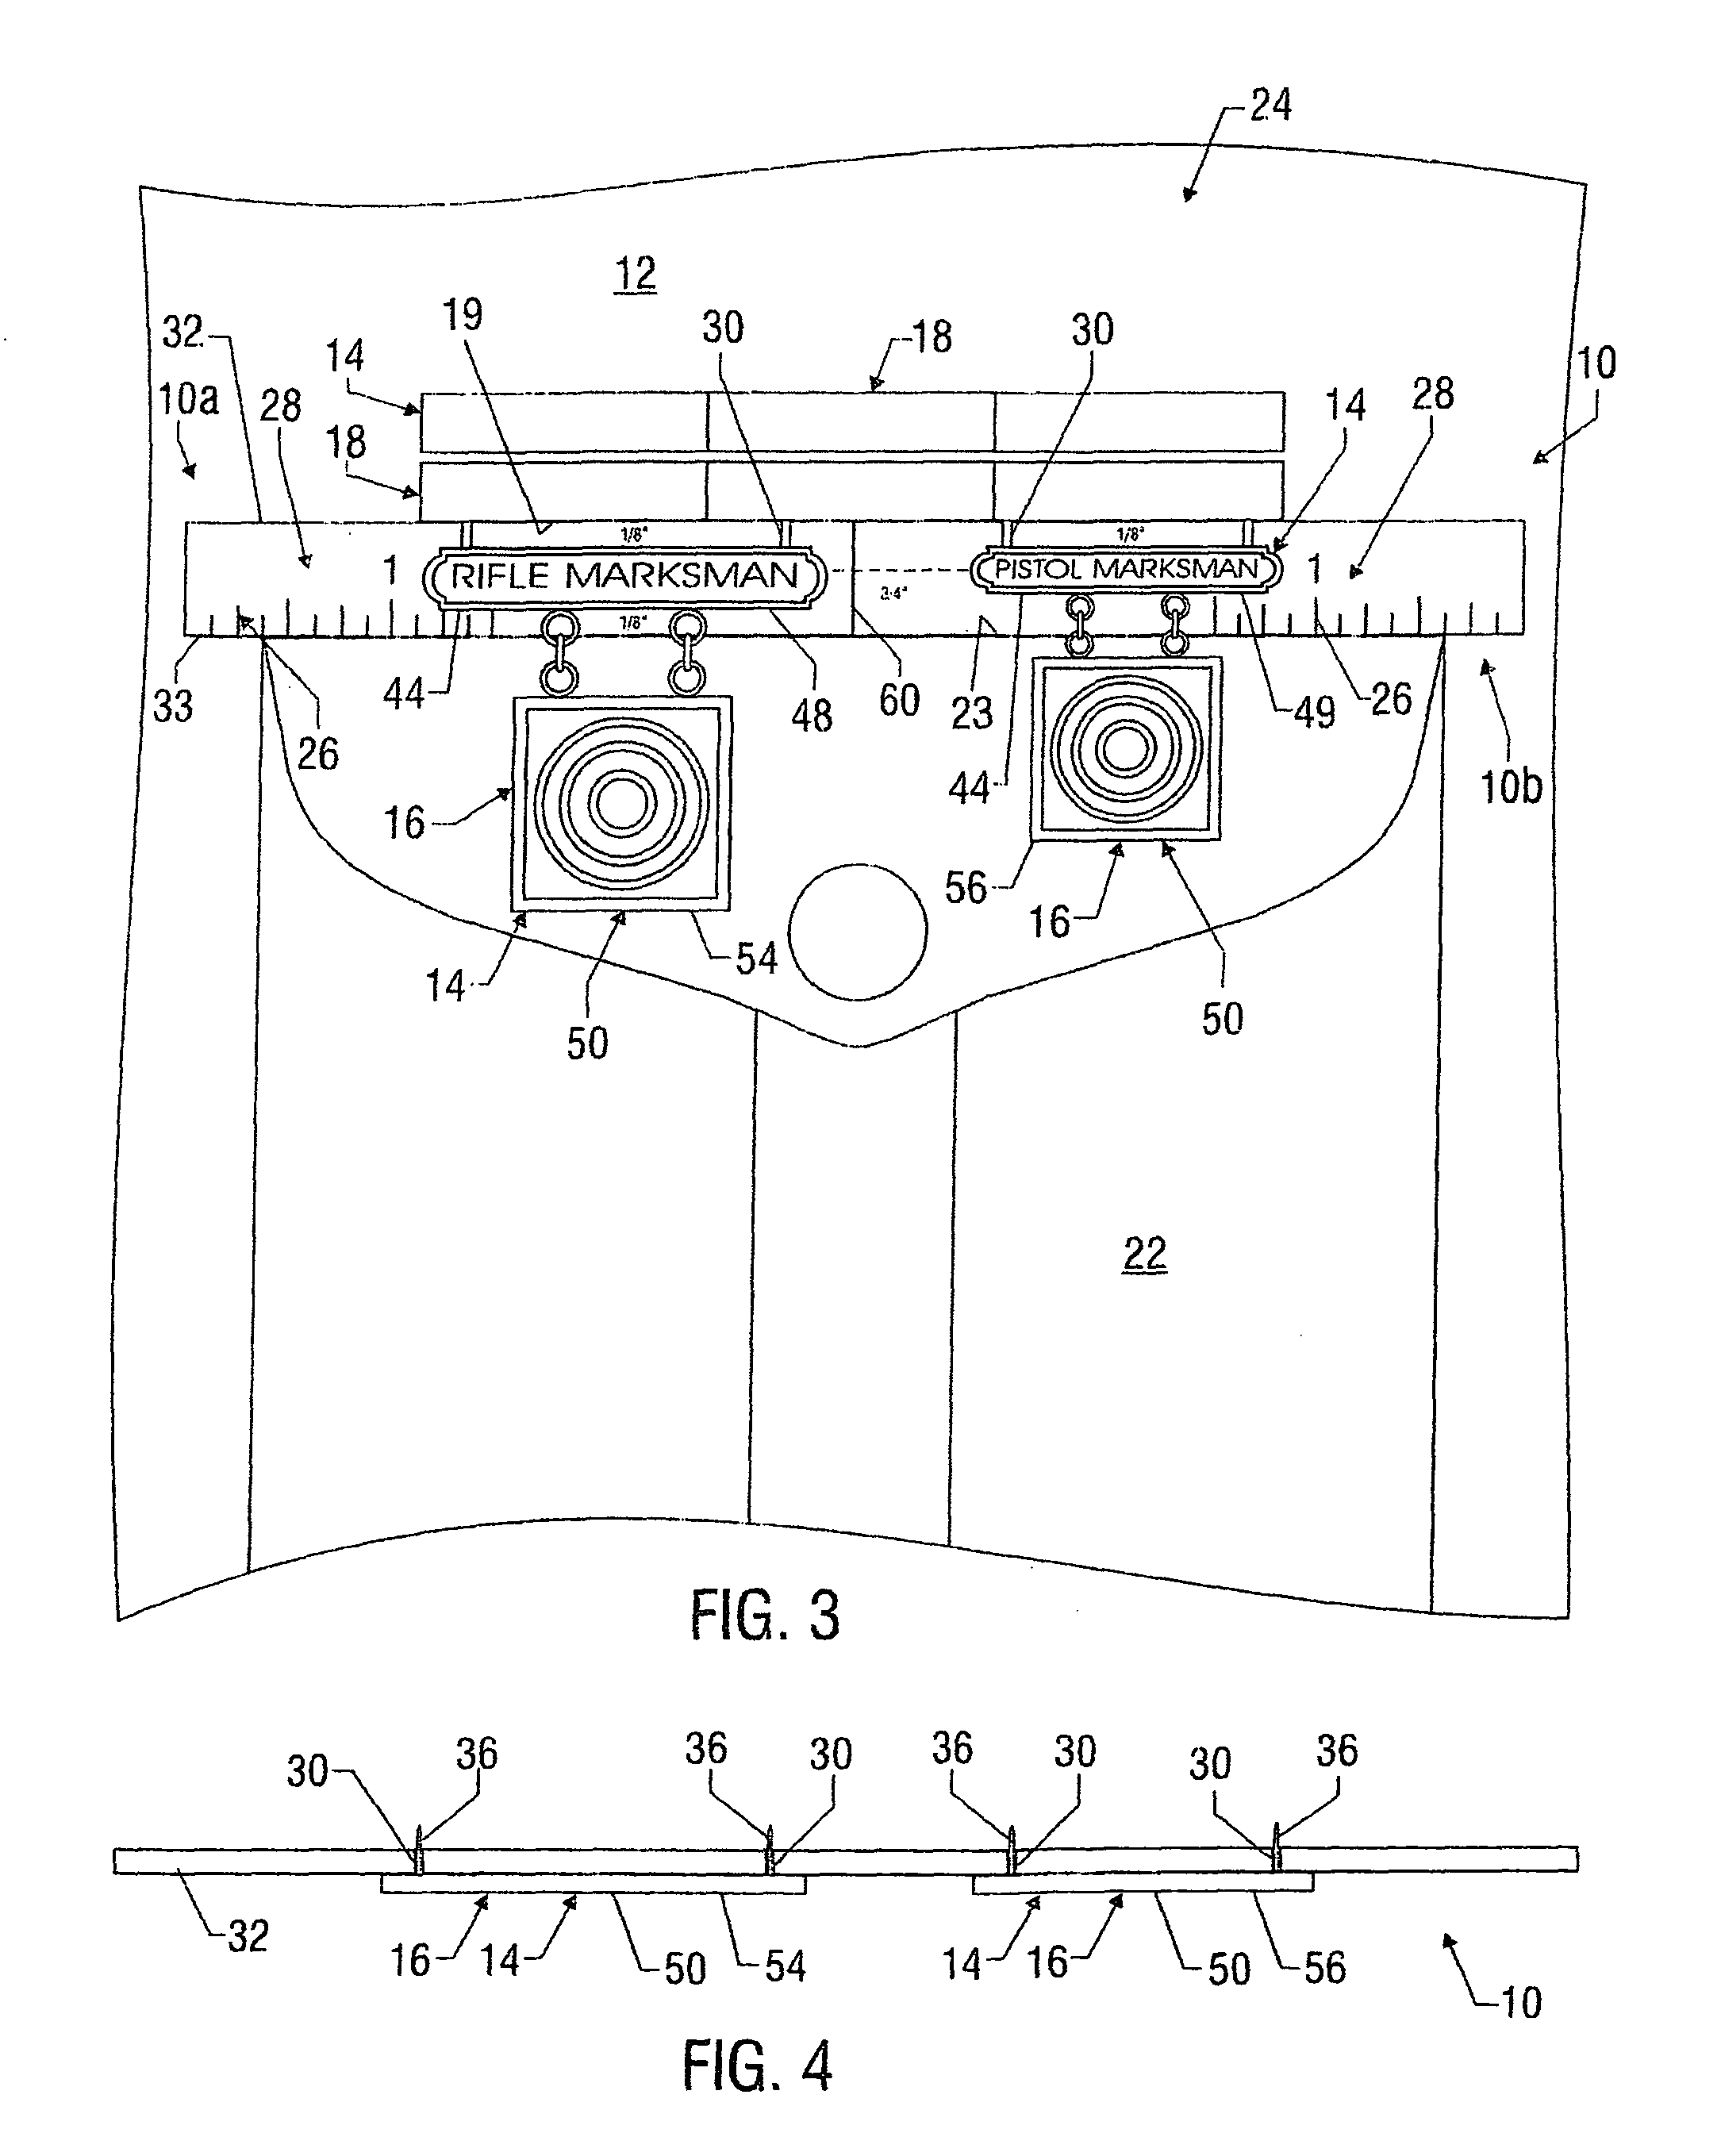 Apparatus and methods for the placement of badges, ribbons and/or other items